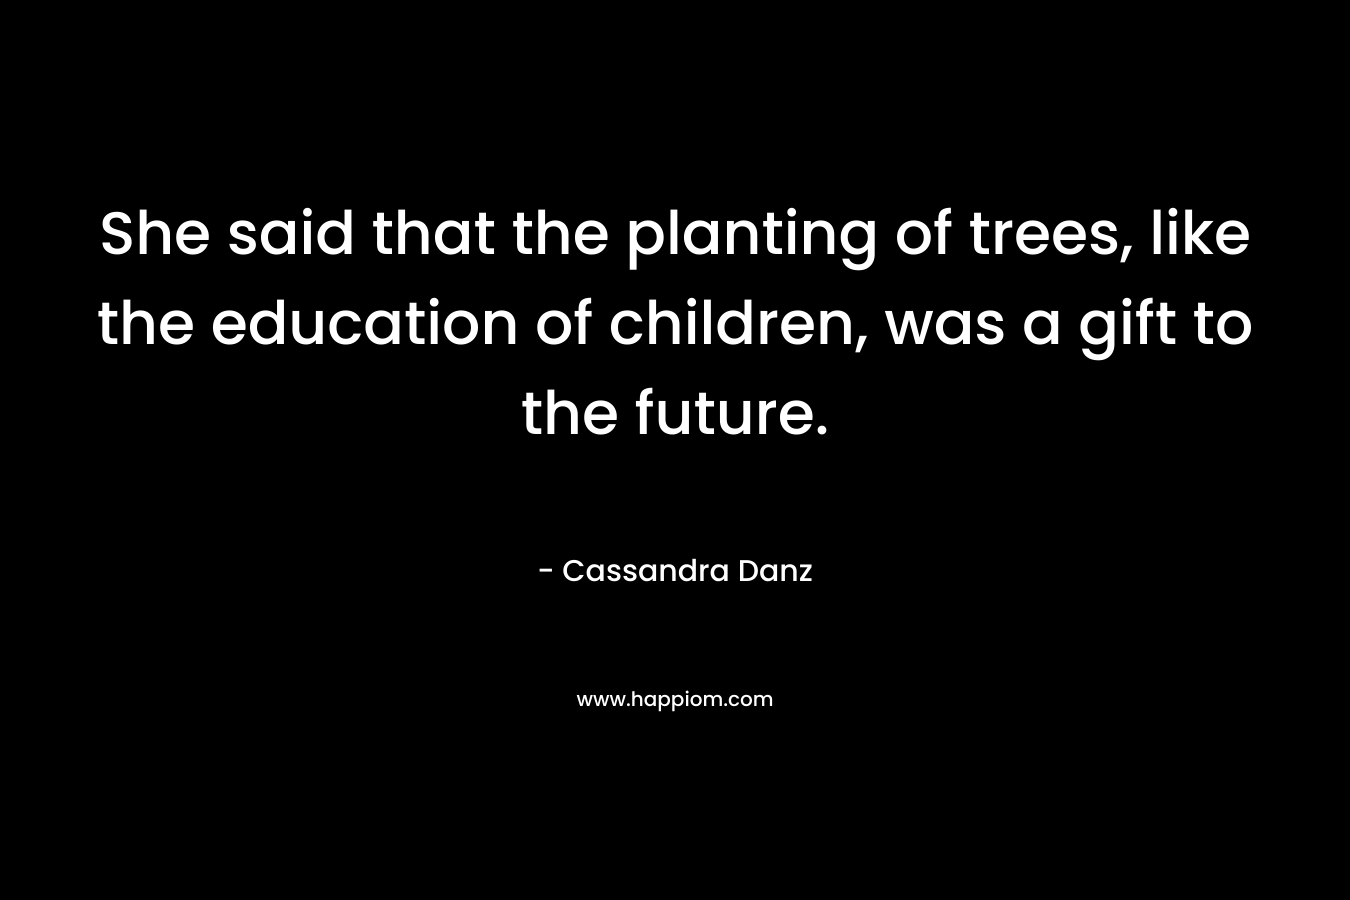 She said that the planting of trees, like the education of children, was a gift to the future.